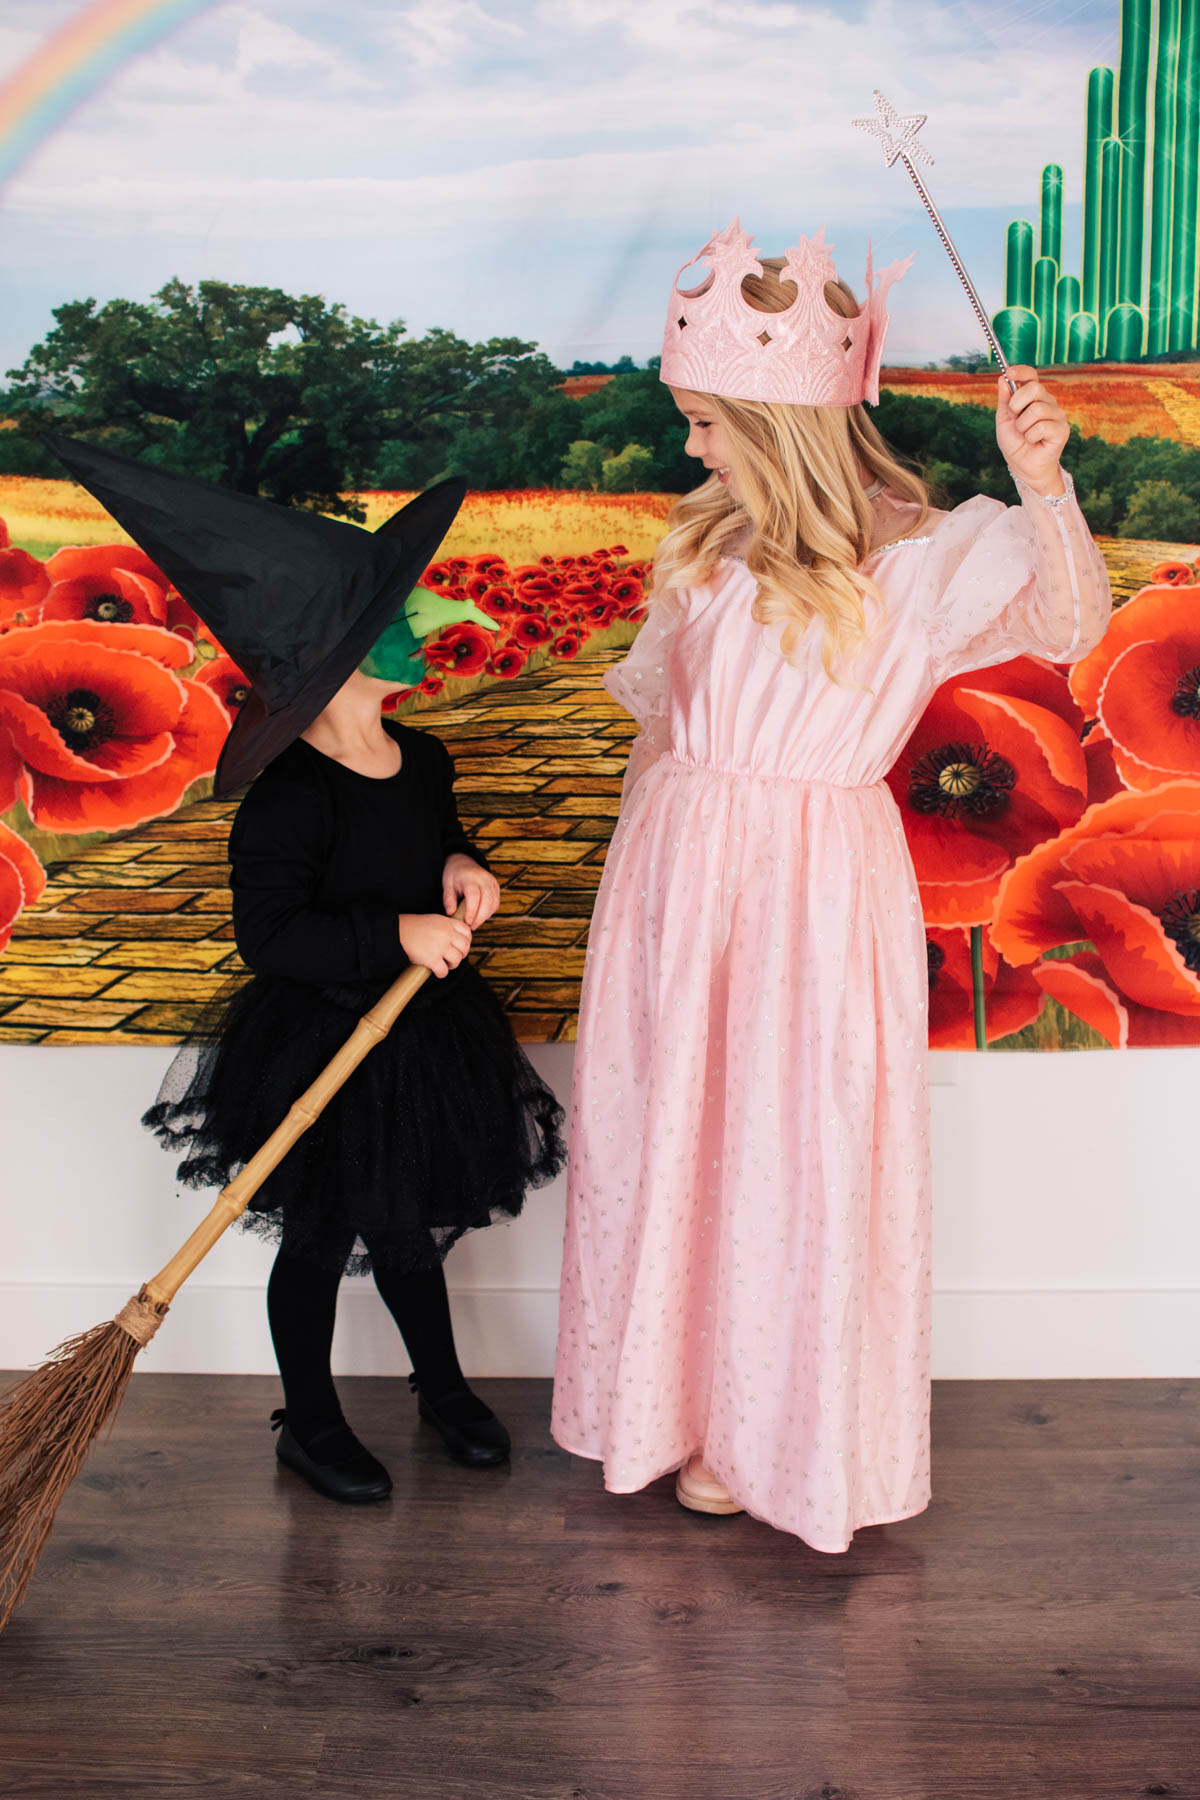 Two sisters dressed as the Wicked Witch and Glinda smile at each other.